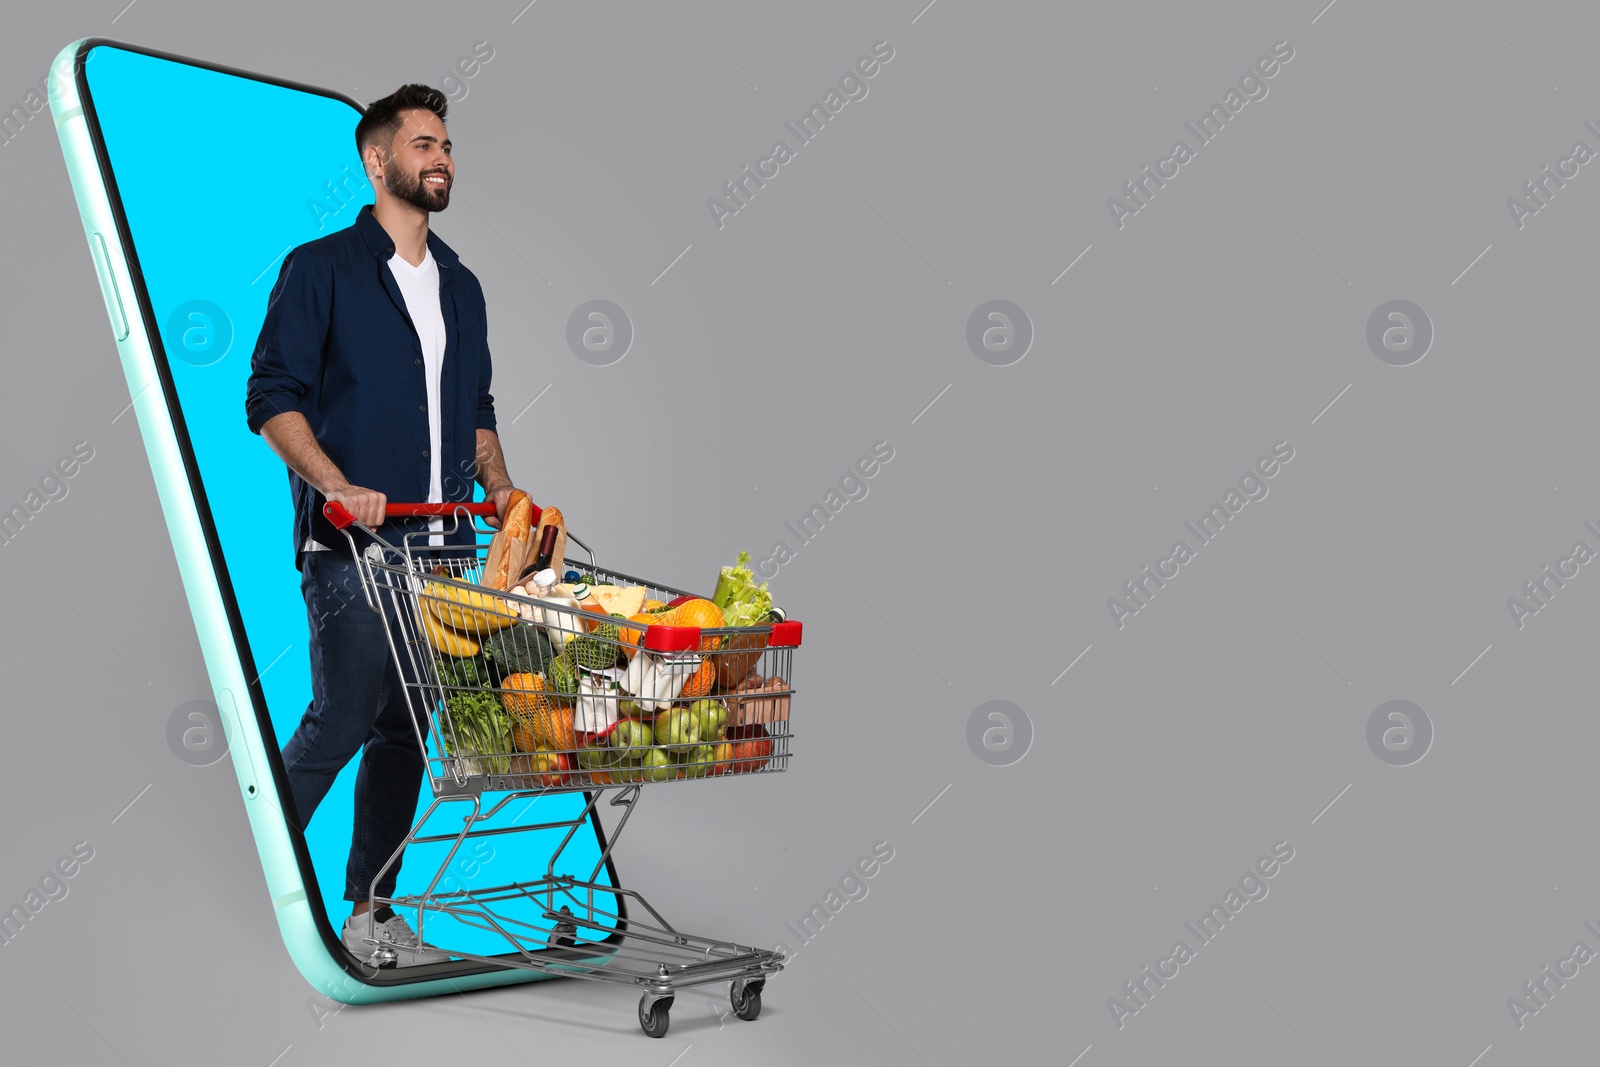 Image of Grocery shopping via internet. Happy man with shopping cart full of products walking out of huge smartphone on grey background, space for text